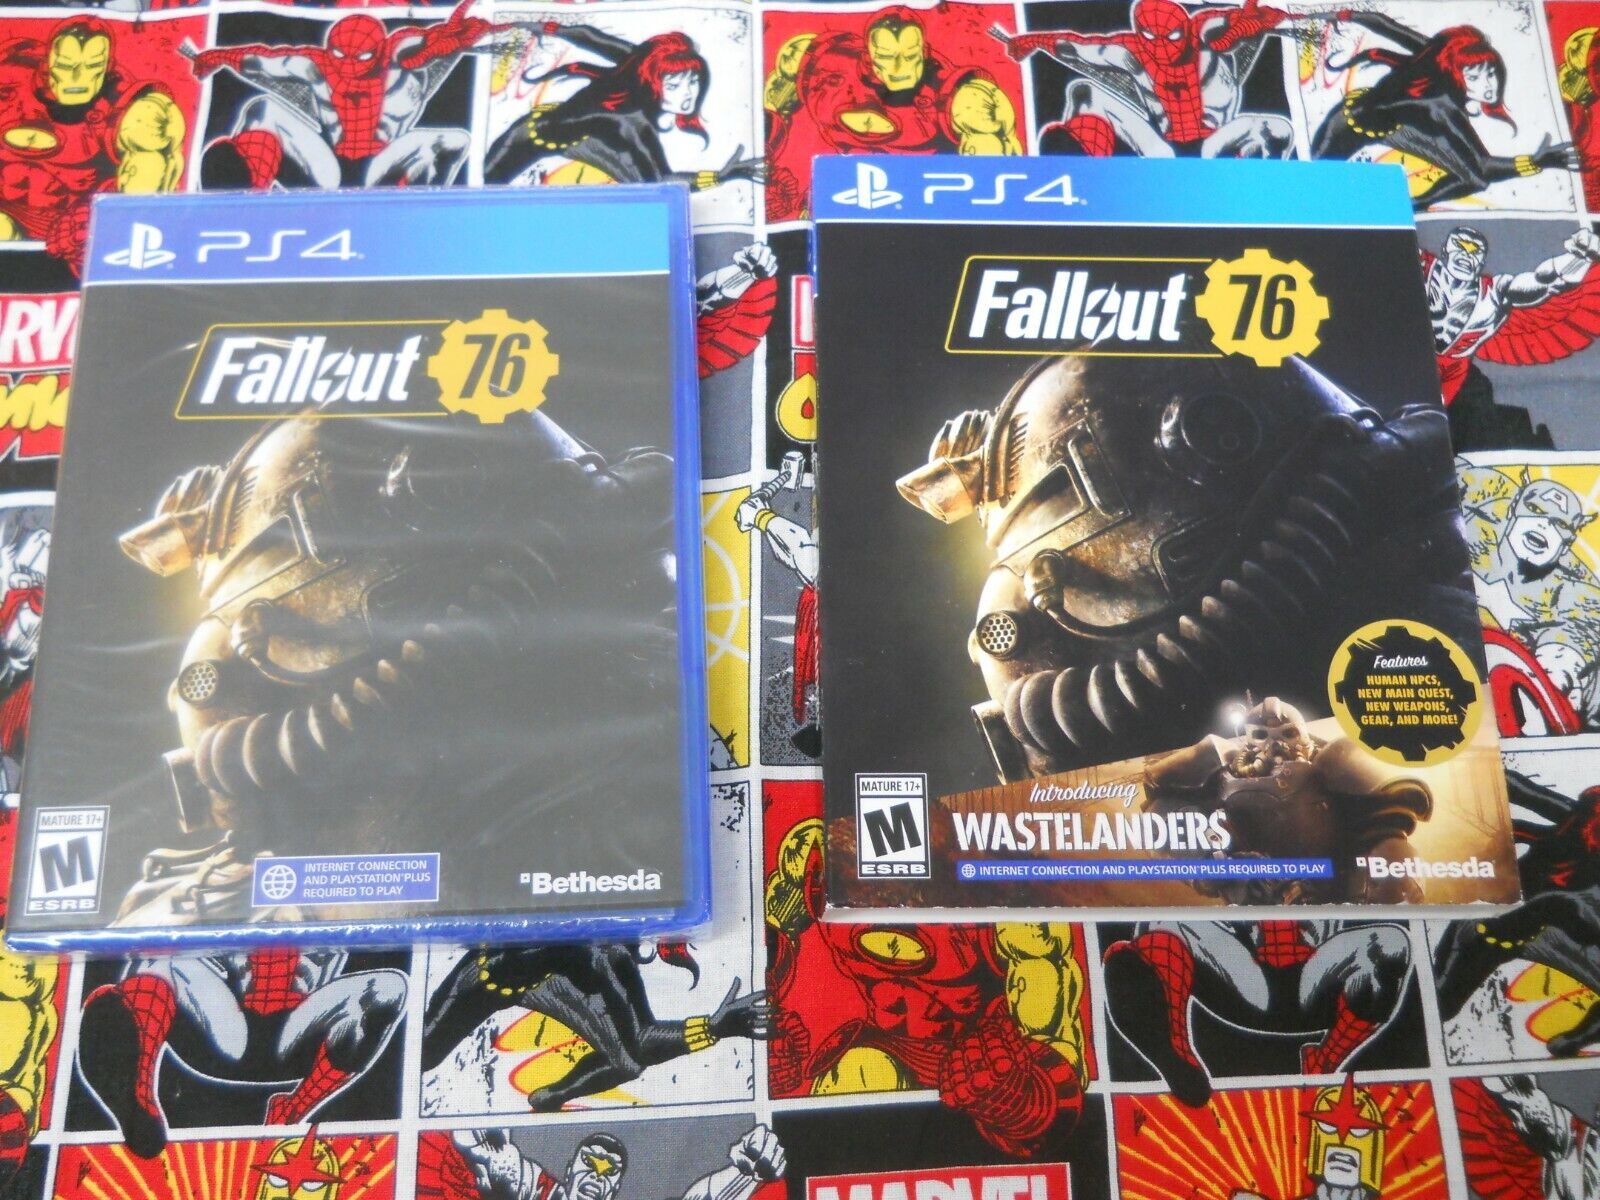 Fallout 76: Playstation 4 [Brand New] PS4 Wastelanders now available